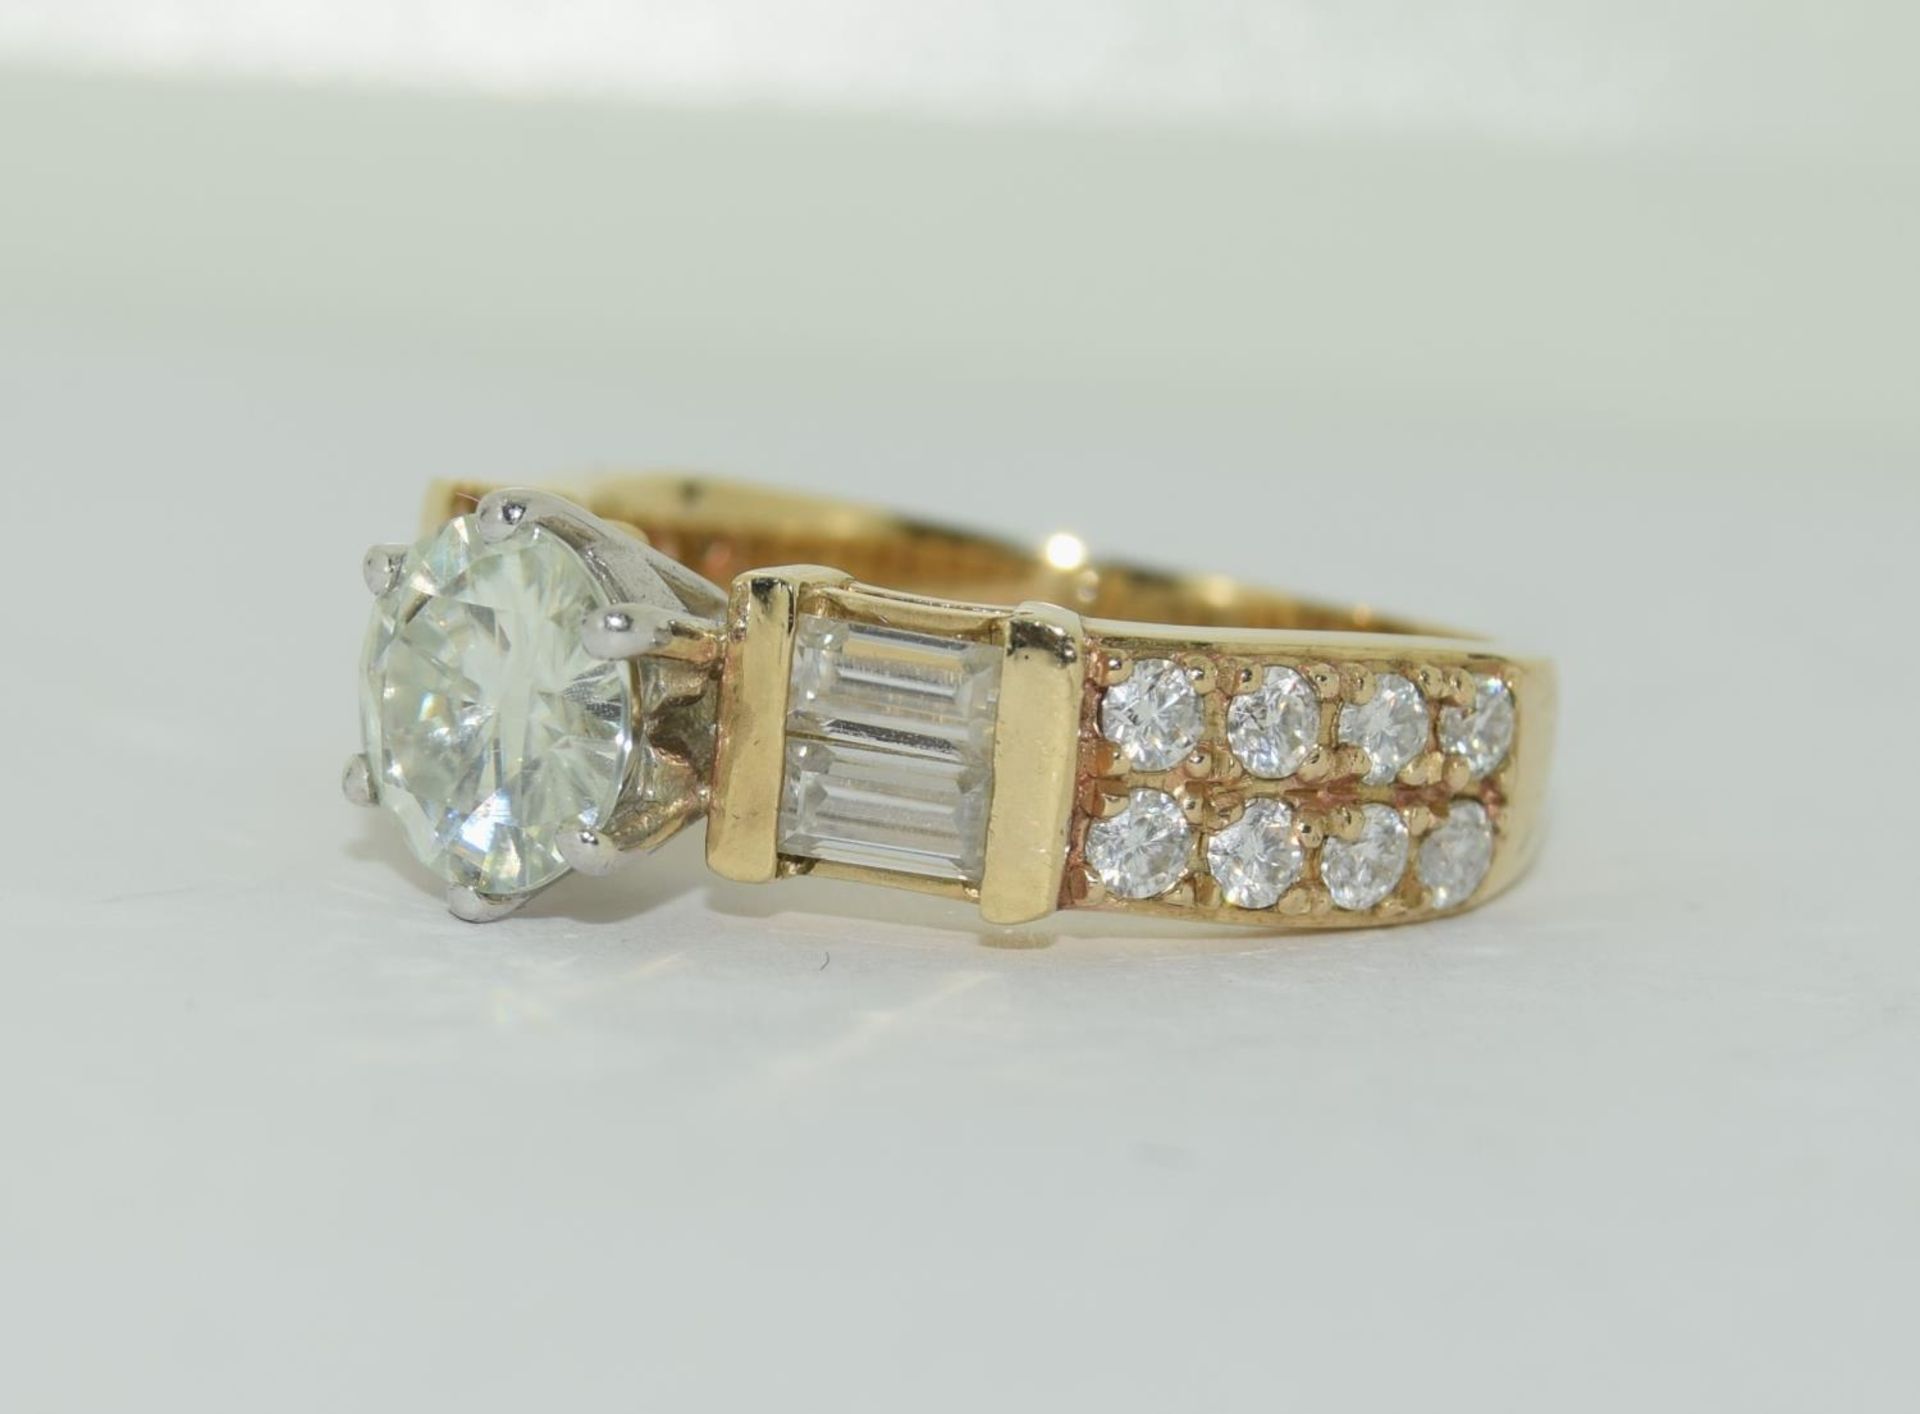 9ct gold Moissanite Diamond ring - 1.00ct centre stone, baguette/round stones on sides. Size M+. - Image 4 of 5